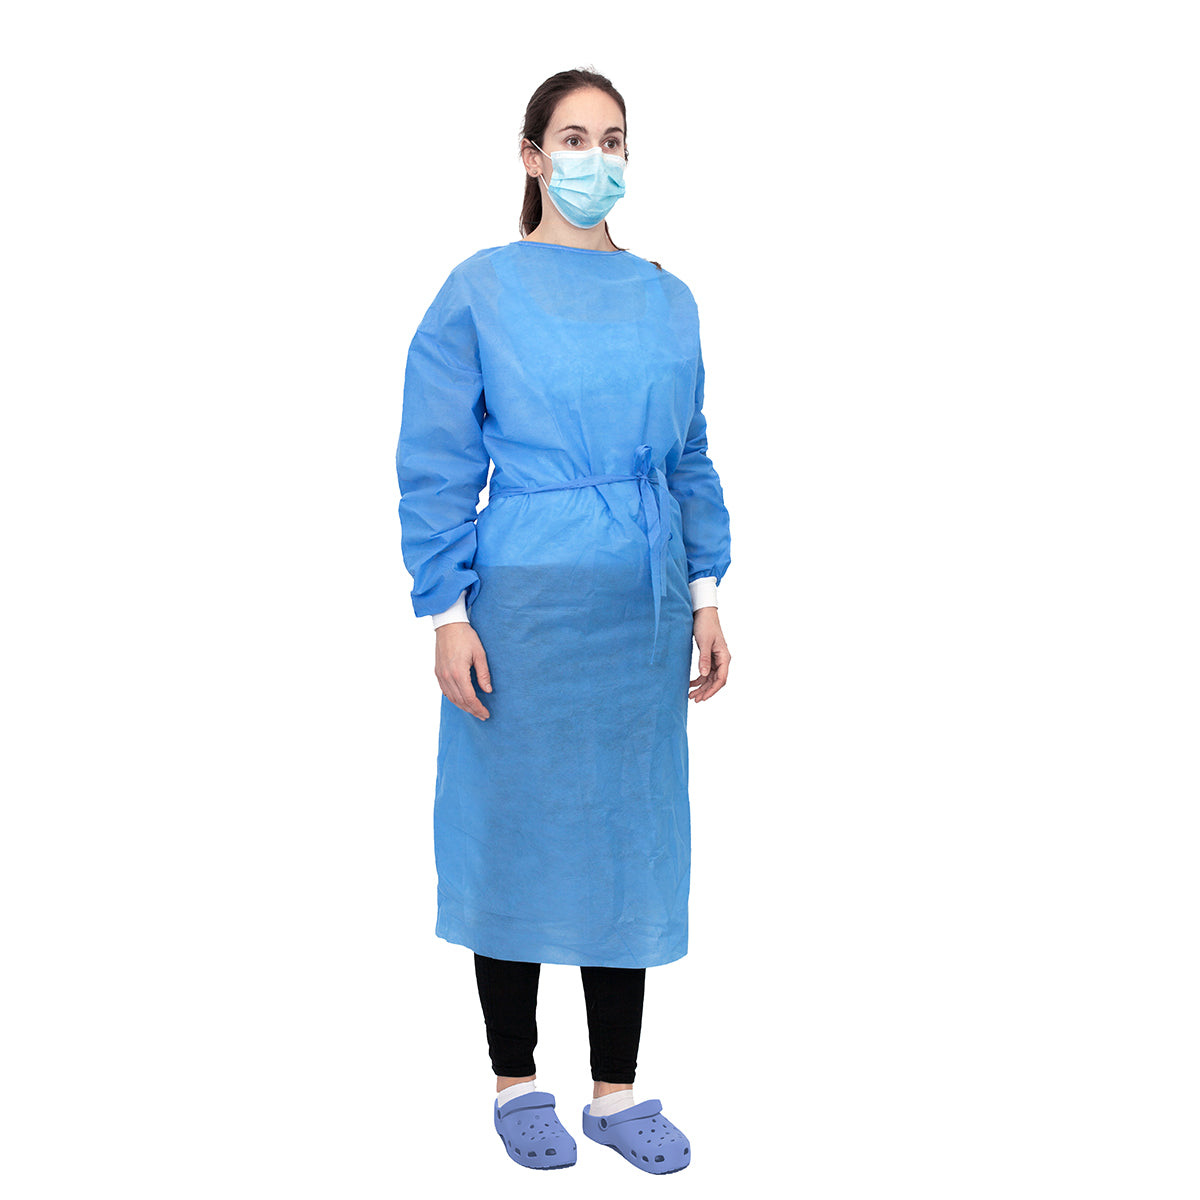 Examination Gown - Blue, Large, 125 X 155 CM